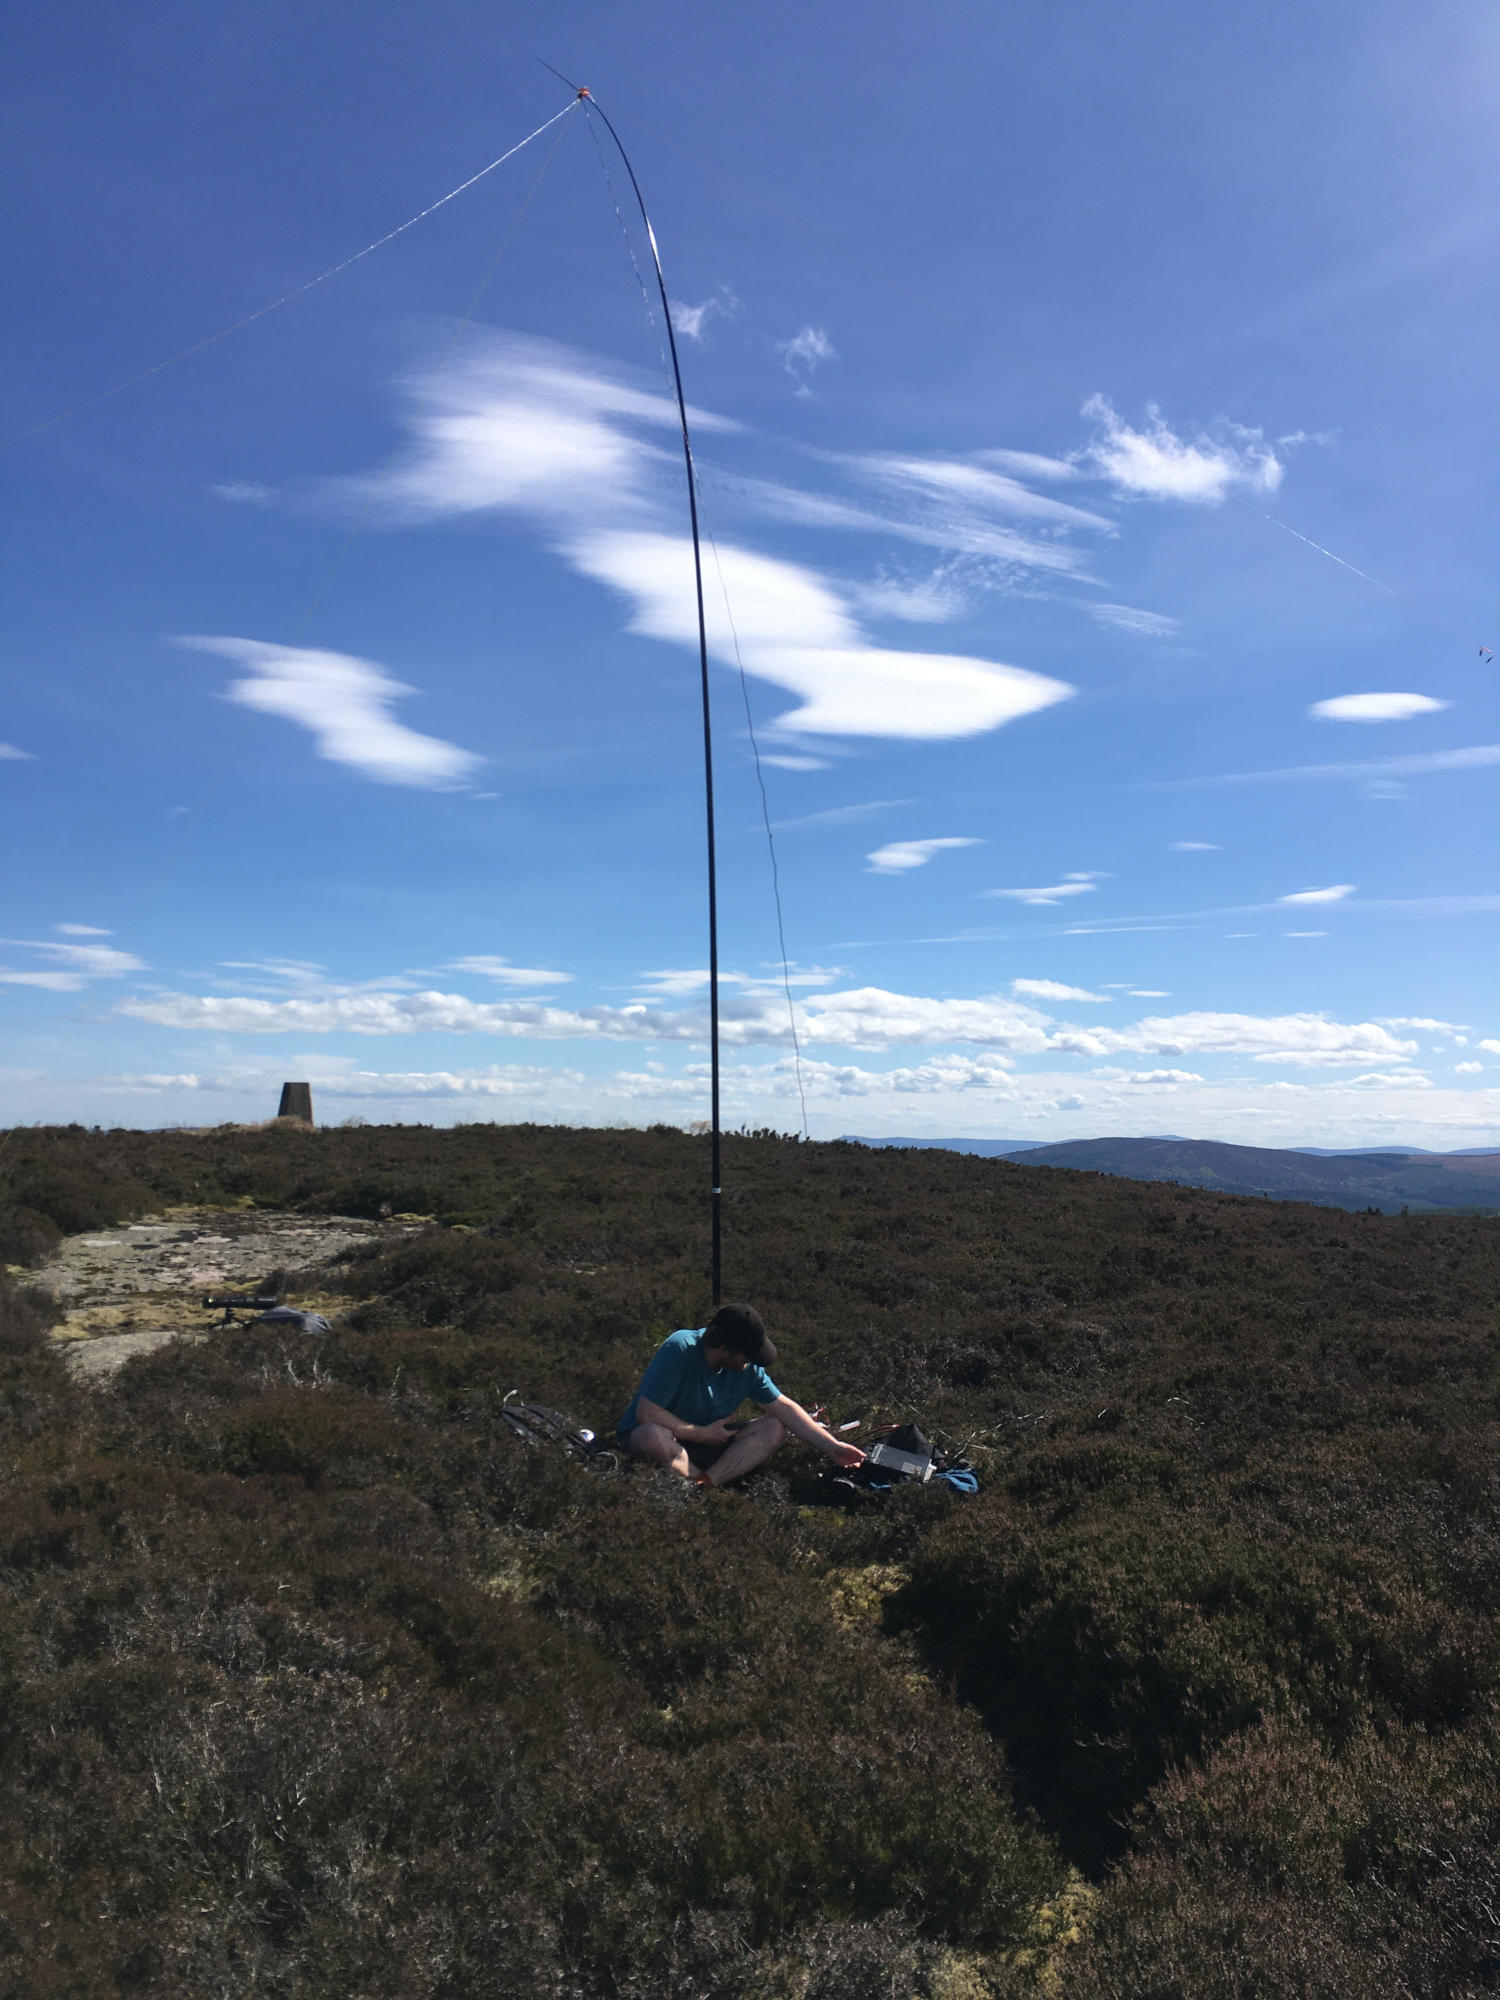 Me, sat at the base of a mast operating a radio on a beautiful day